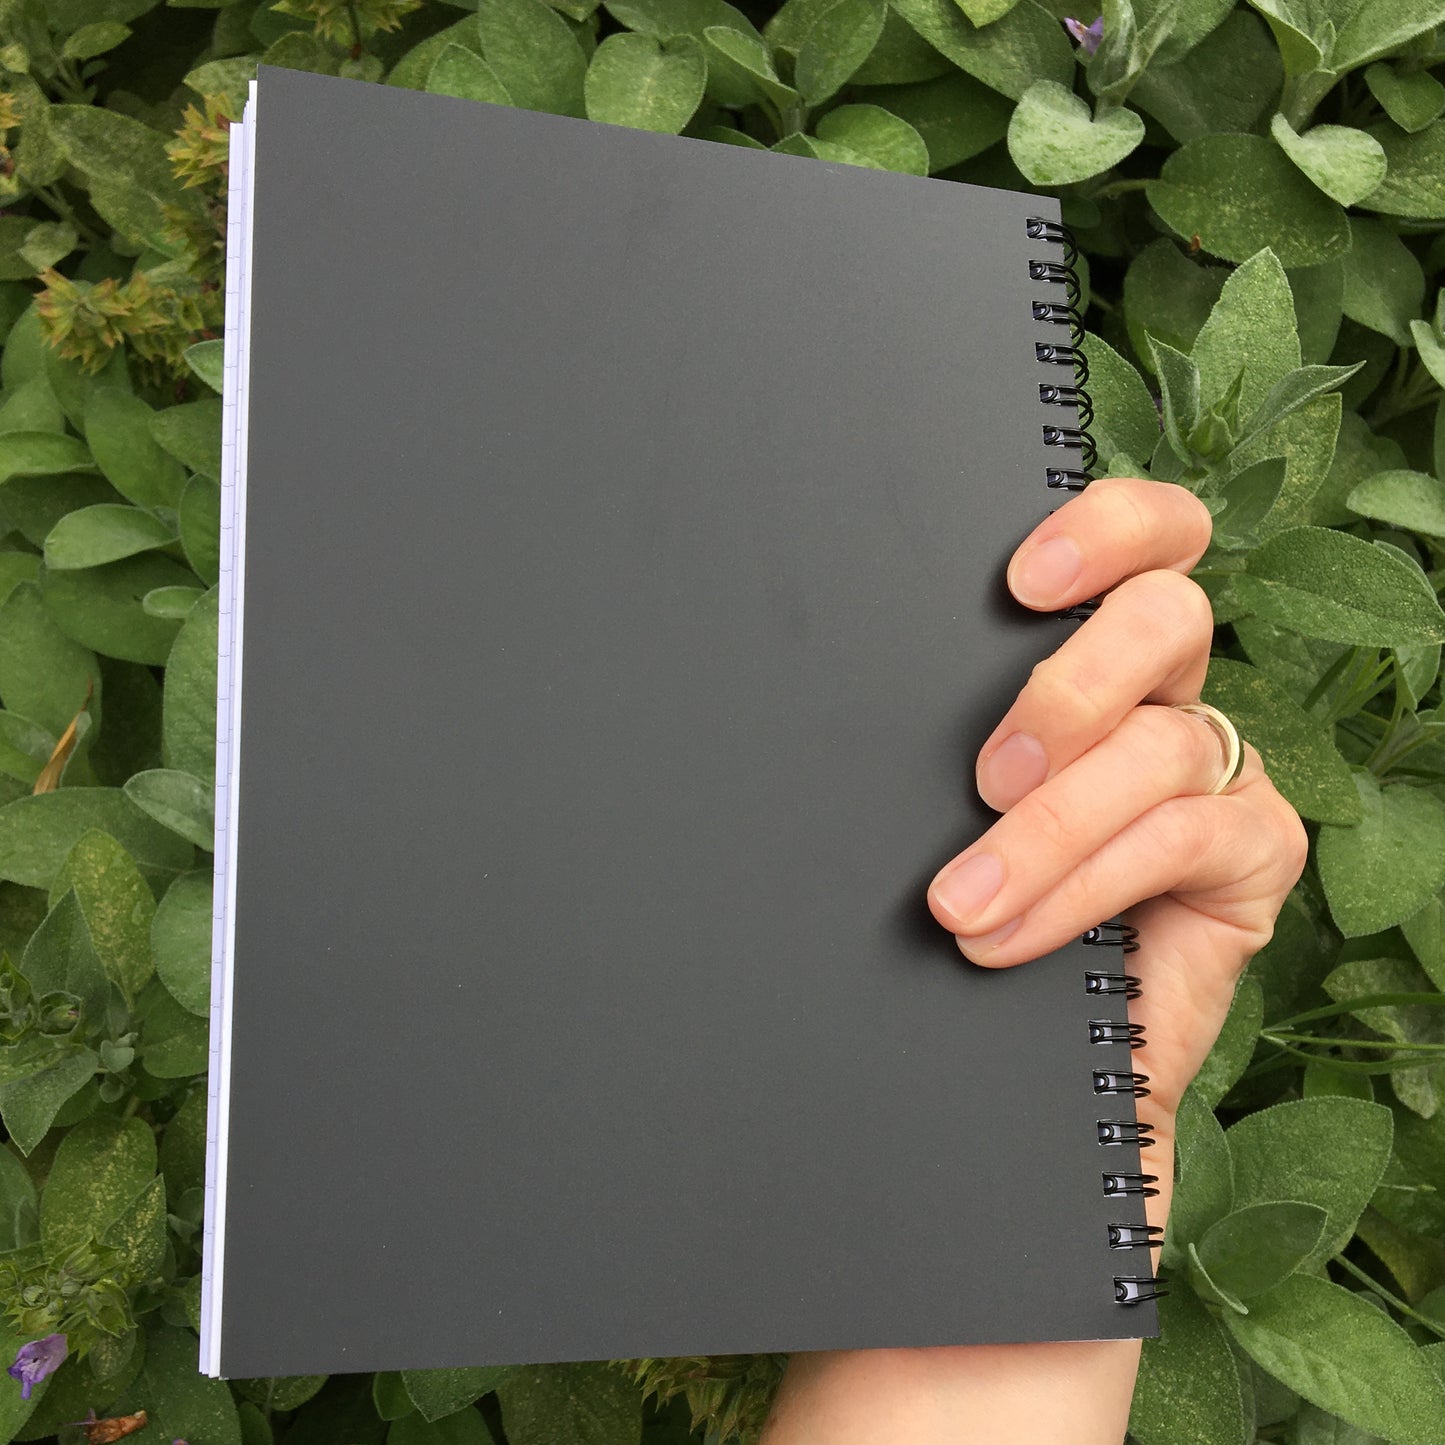 A spiral notebook held in a hand showing the back cover which is black. The metal spiral rings are also black.